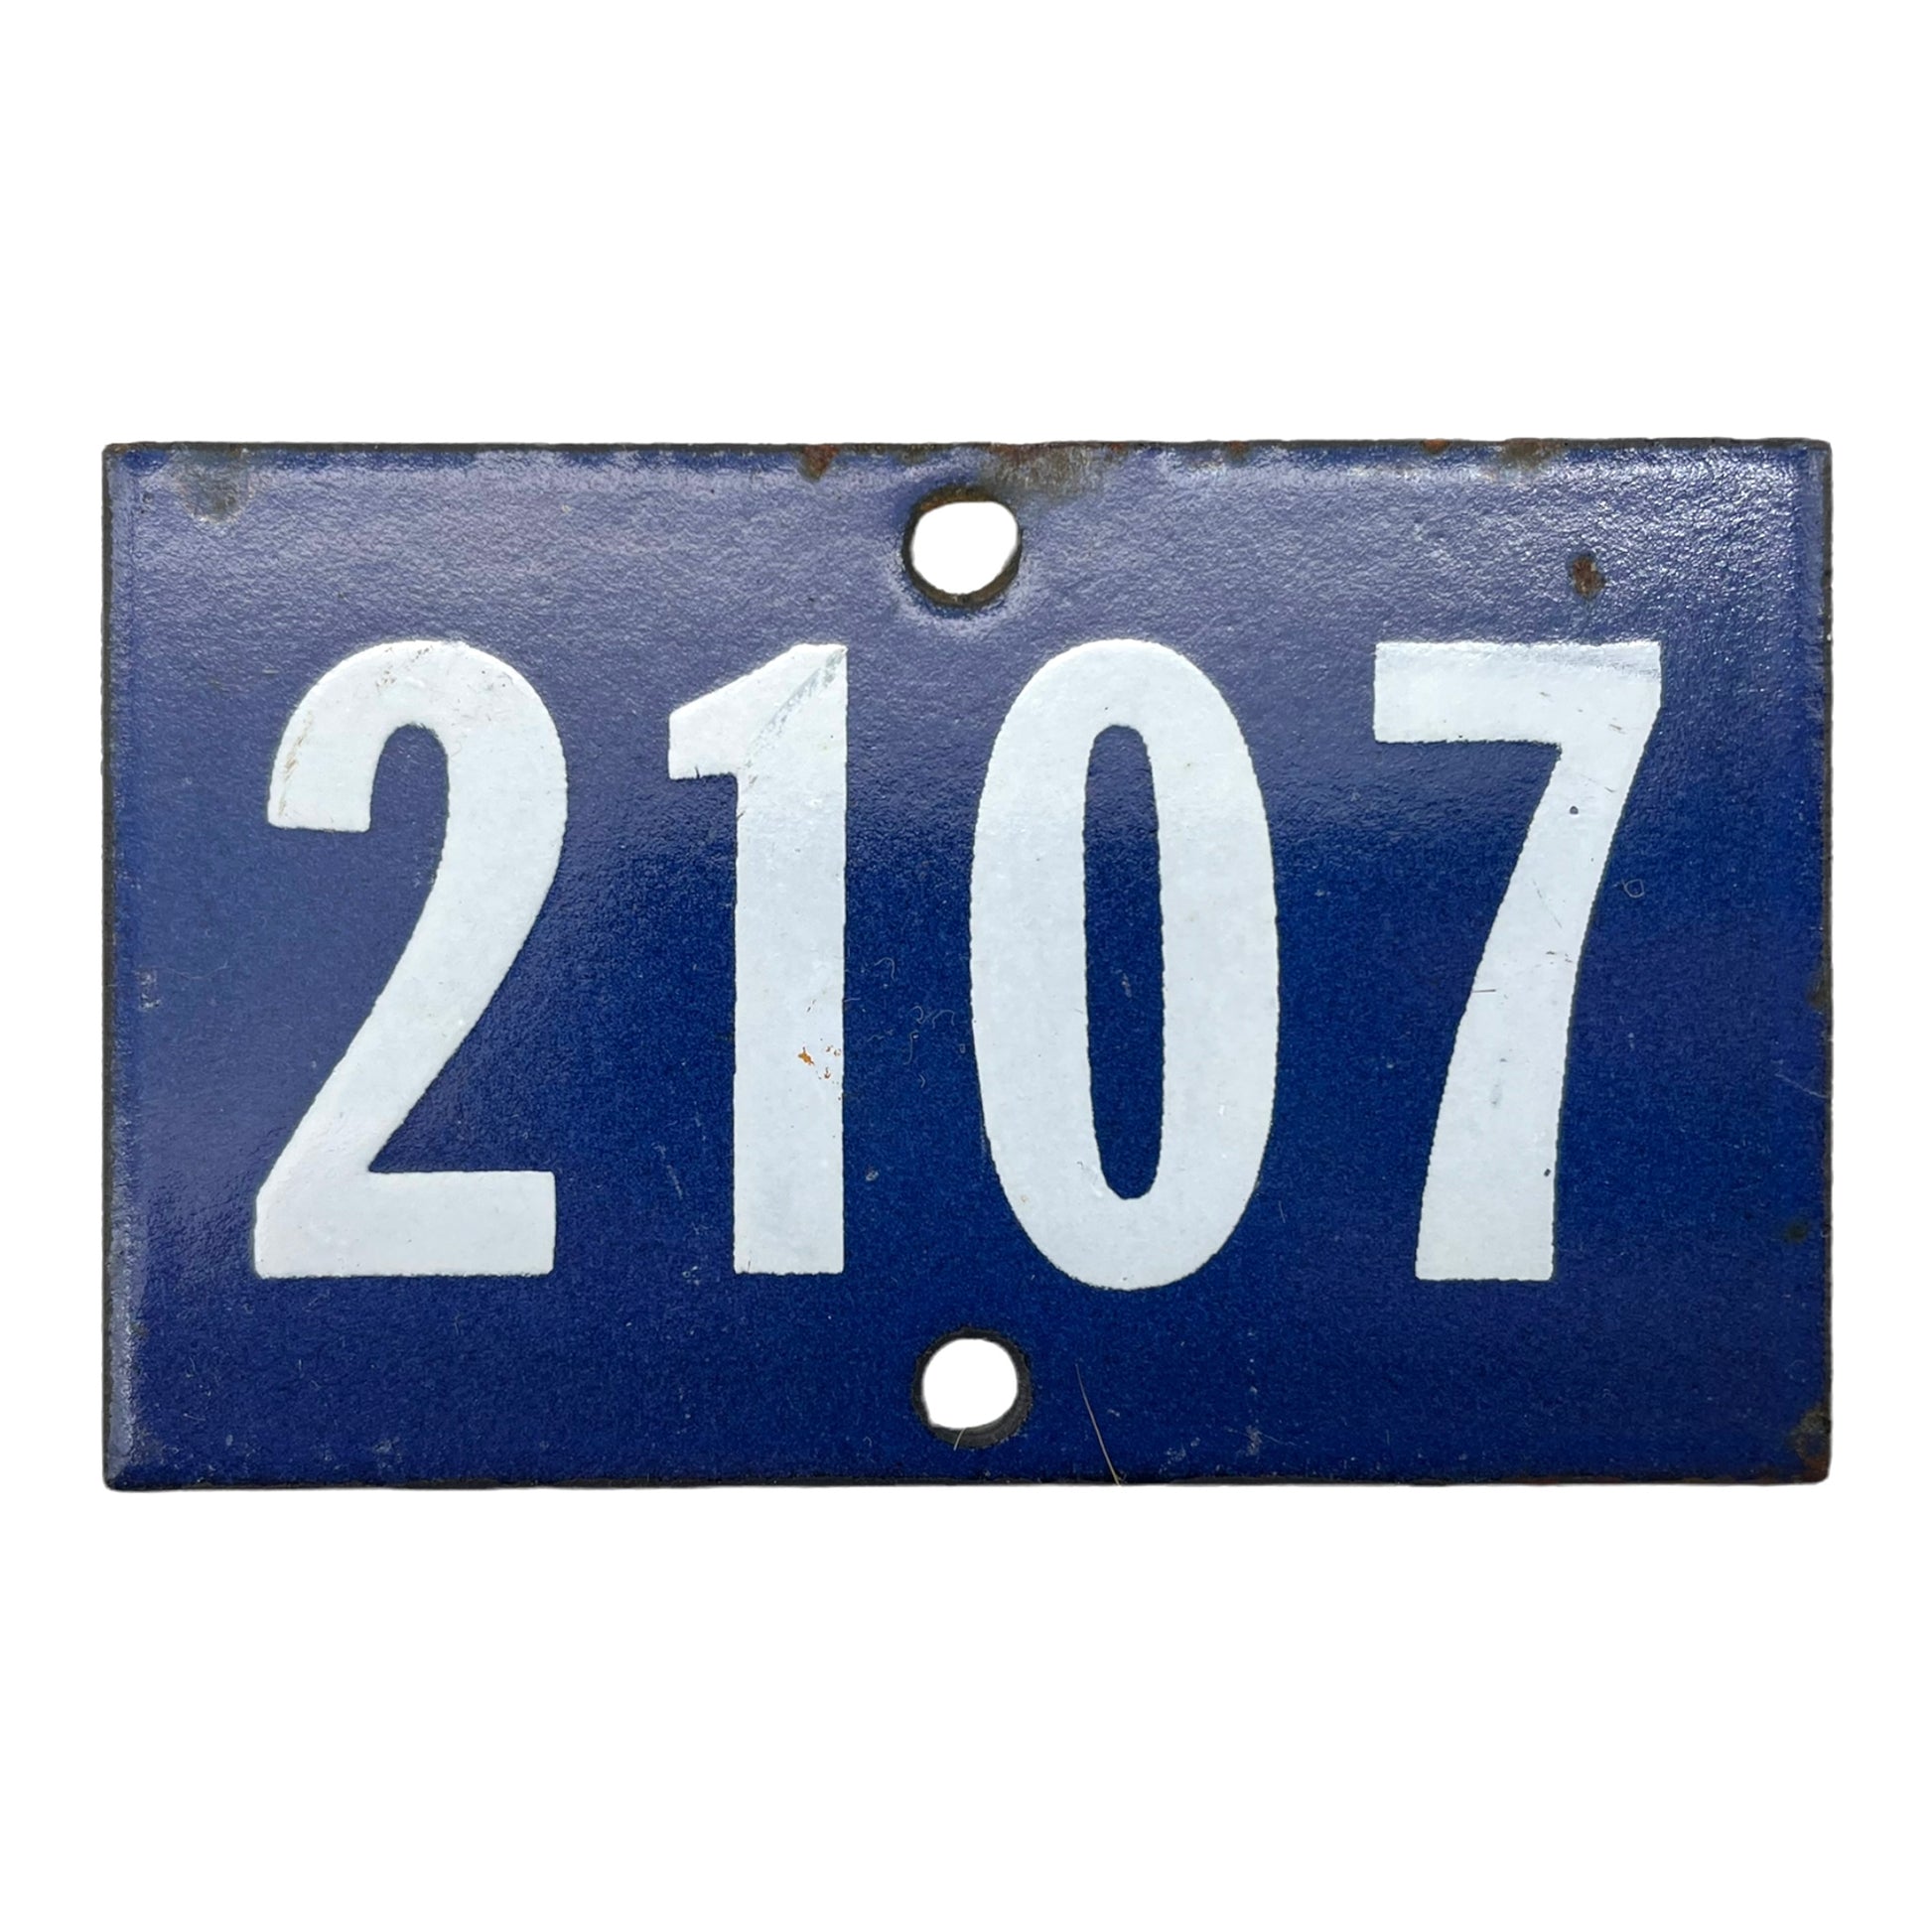 image of vintage French enamel door or house number 2107 sold by allthingsfrenchstore.com